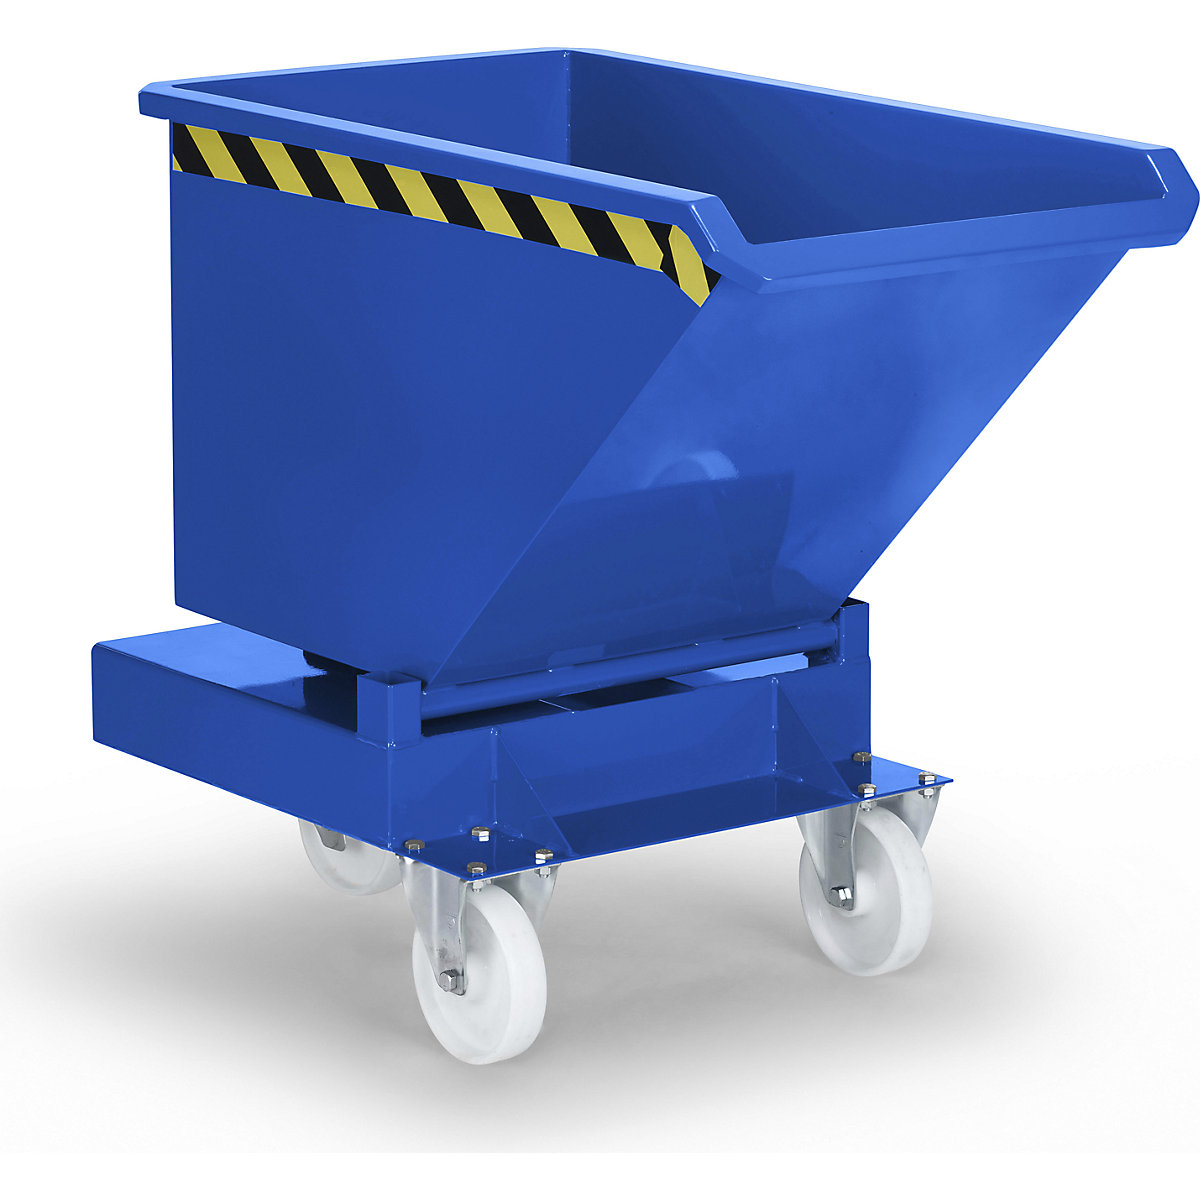 Tilting skip with wheels